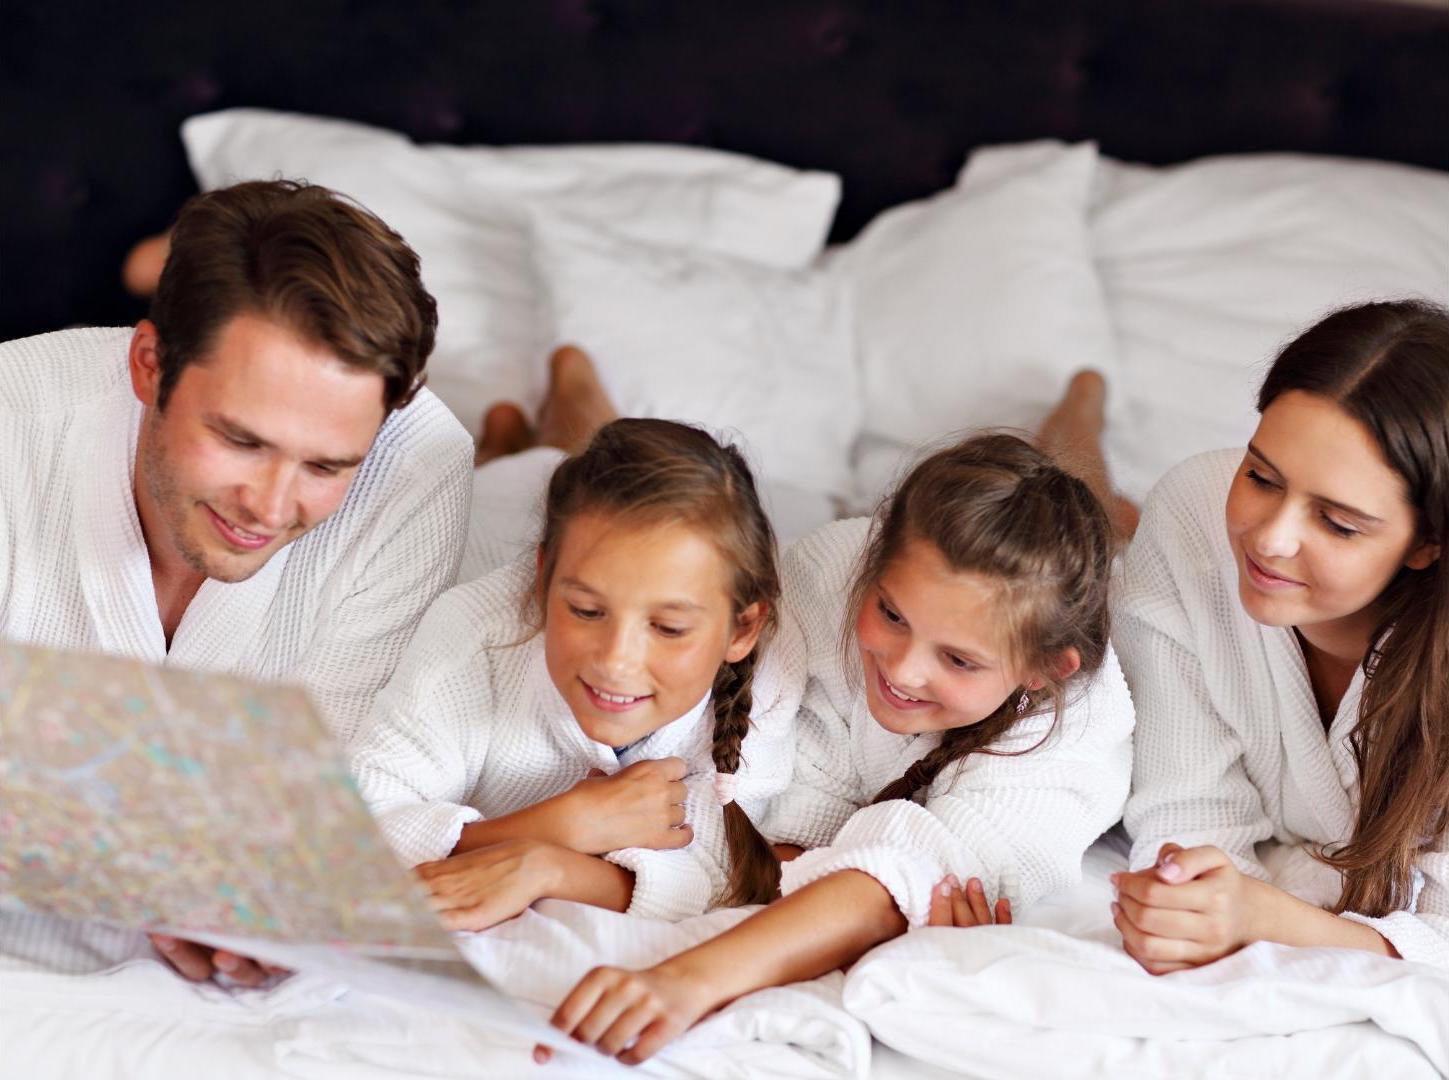 family-guy-is-showing-the-hotel-map-to-his-family-on-the-hotel-white-bed